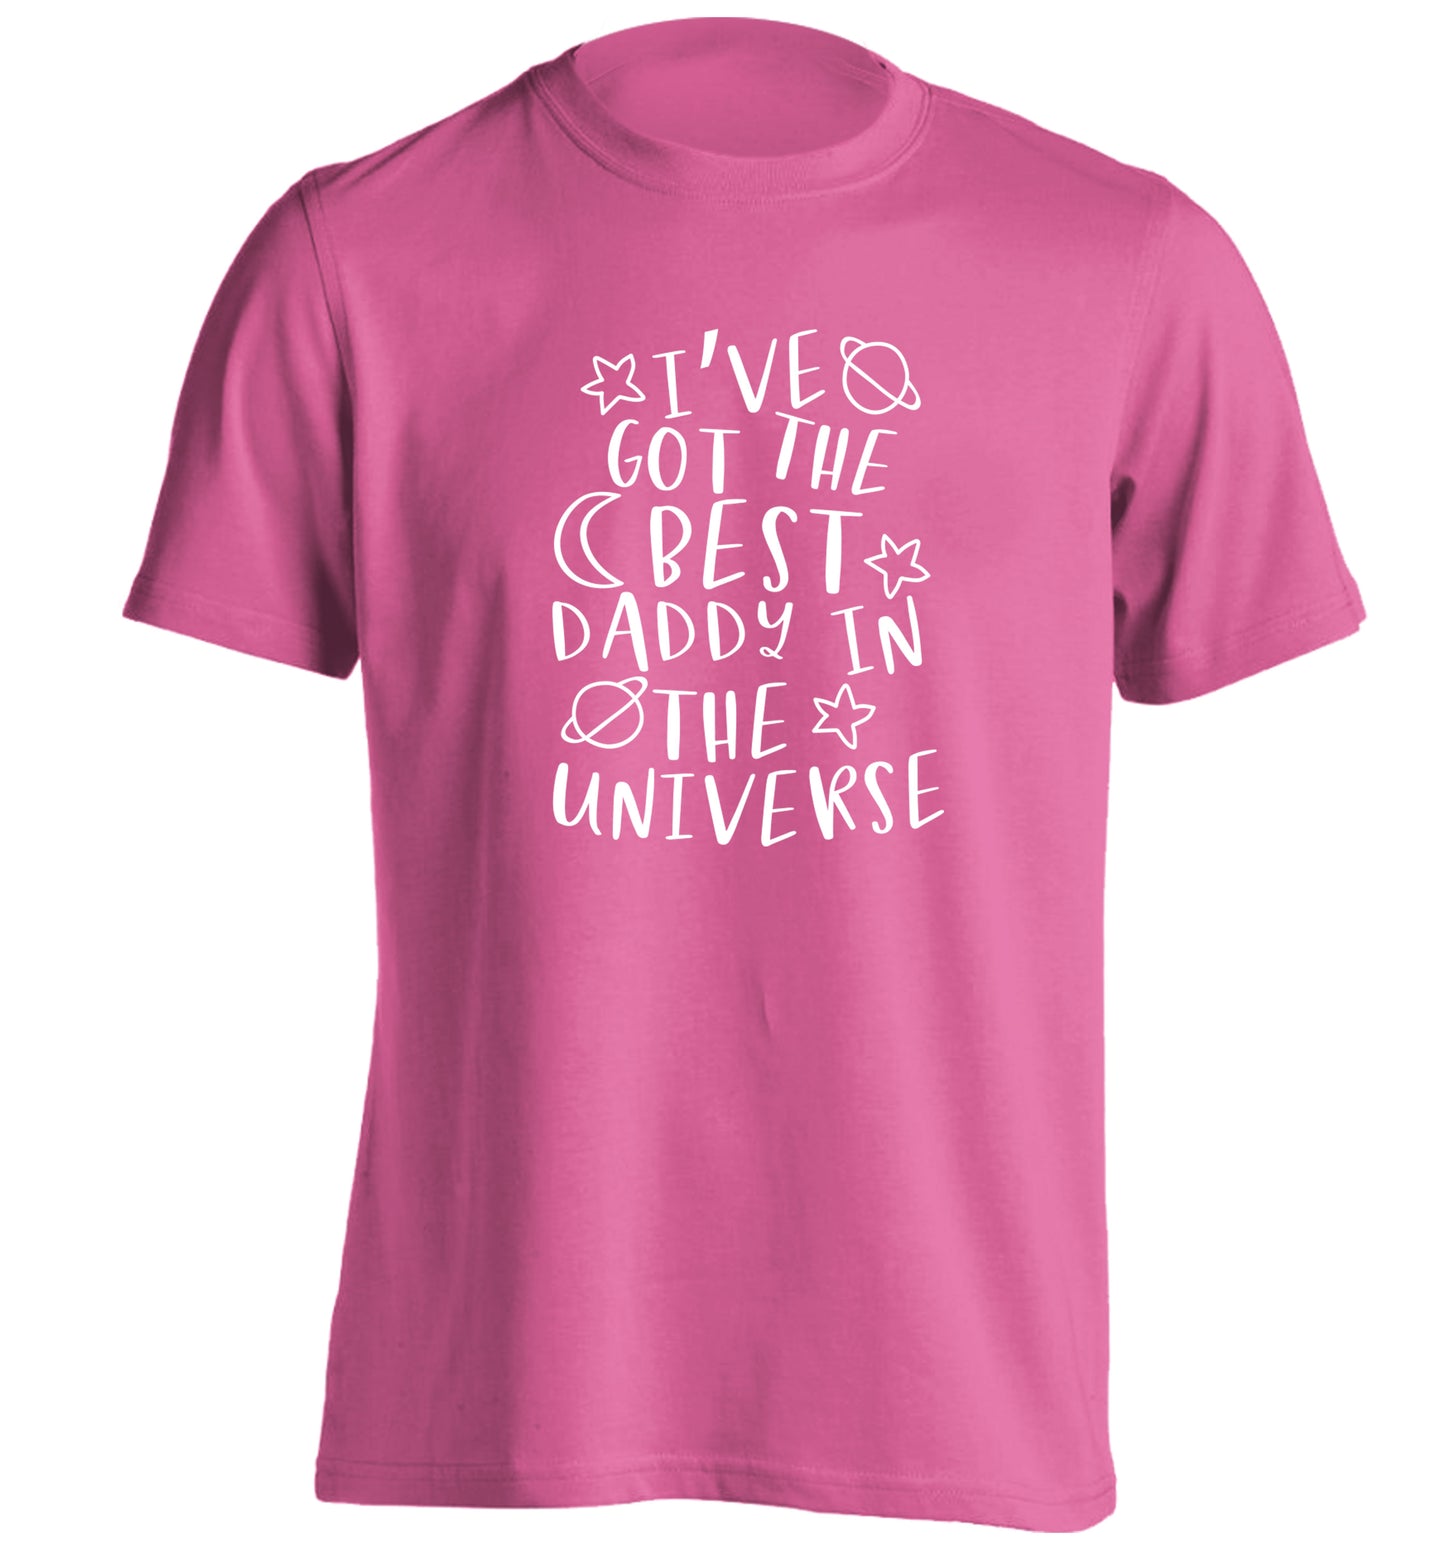 I've got the best daddy in the universe adults unisex pink Tshirt 2XL